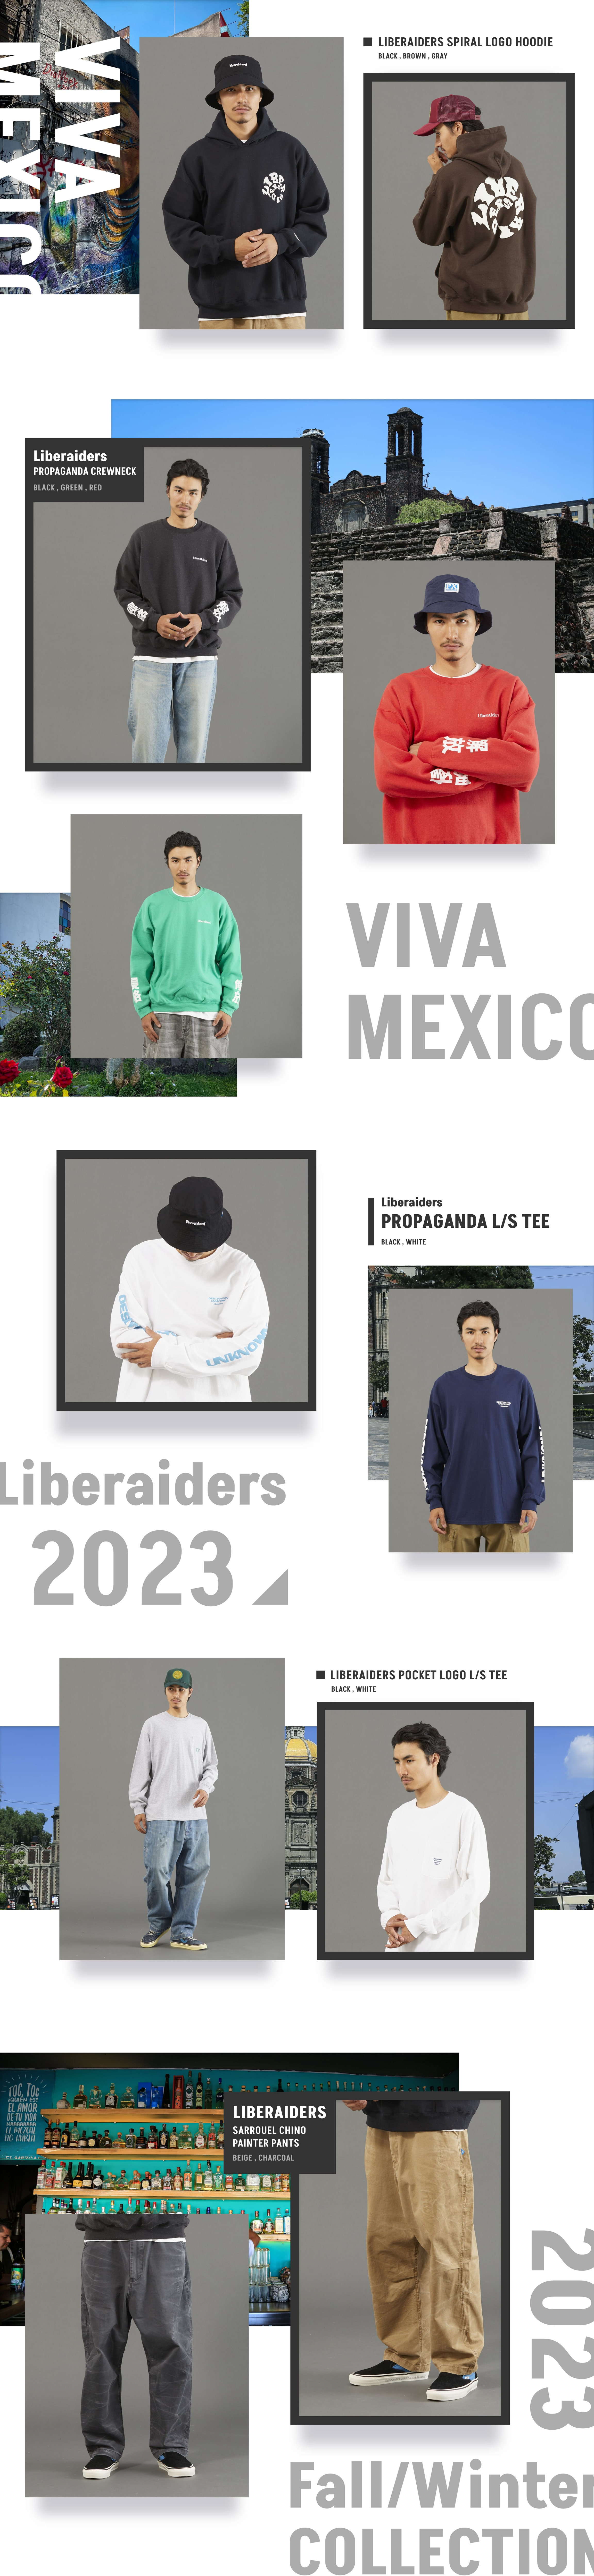 liberaiders-2023-aw-collection